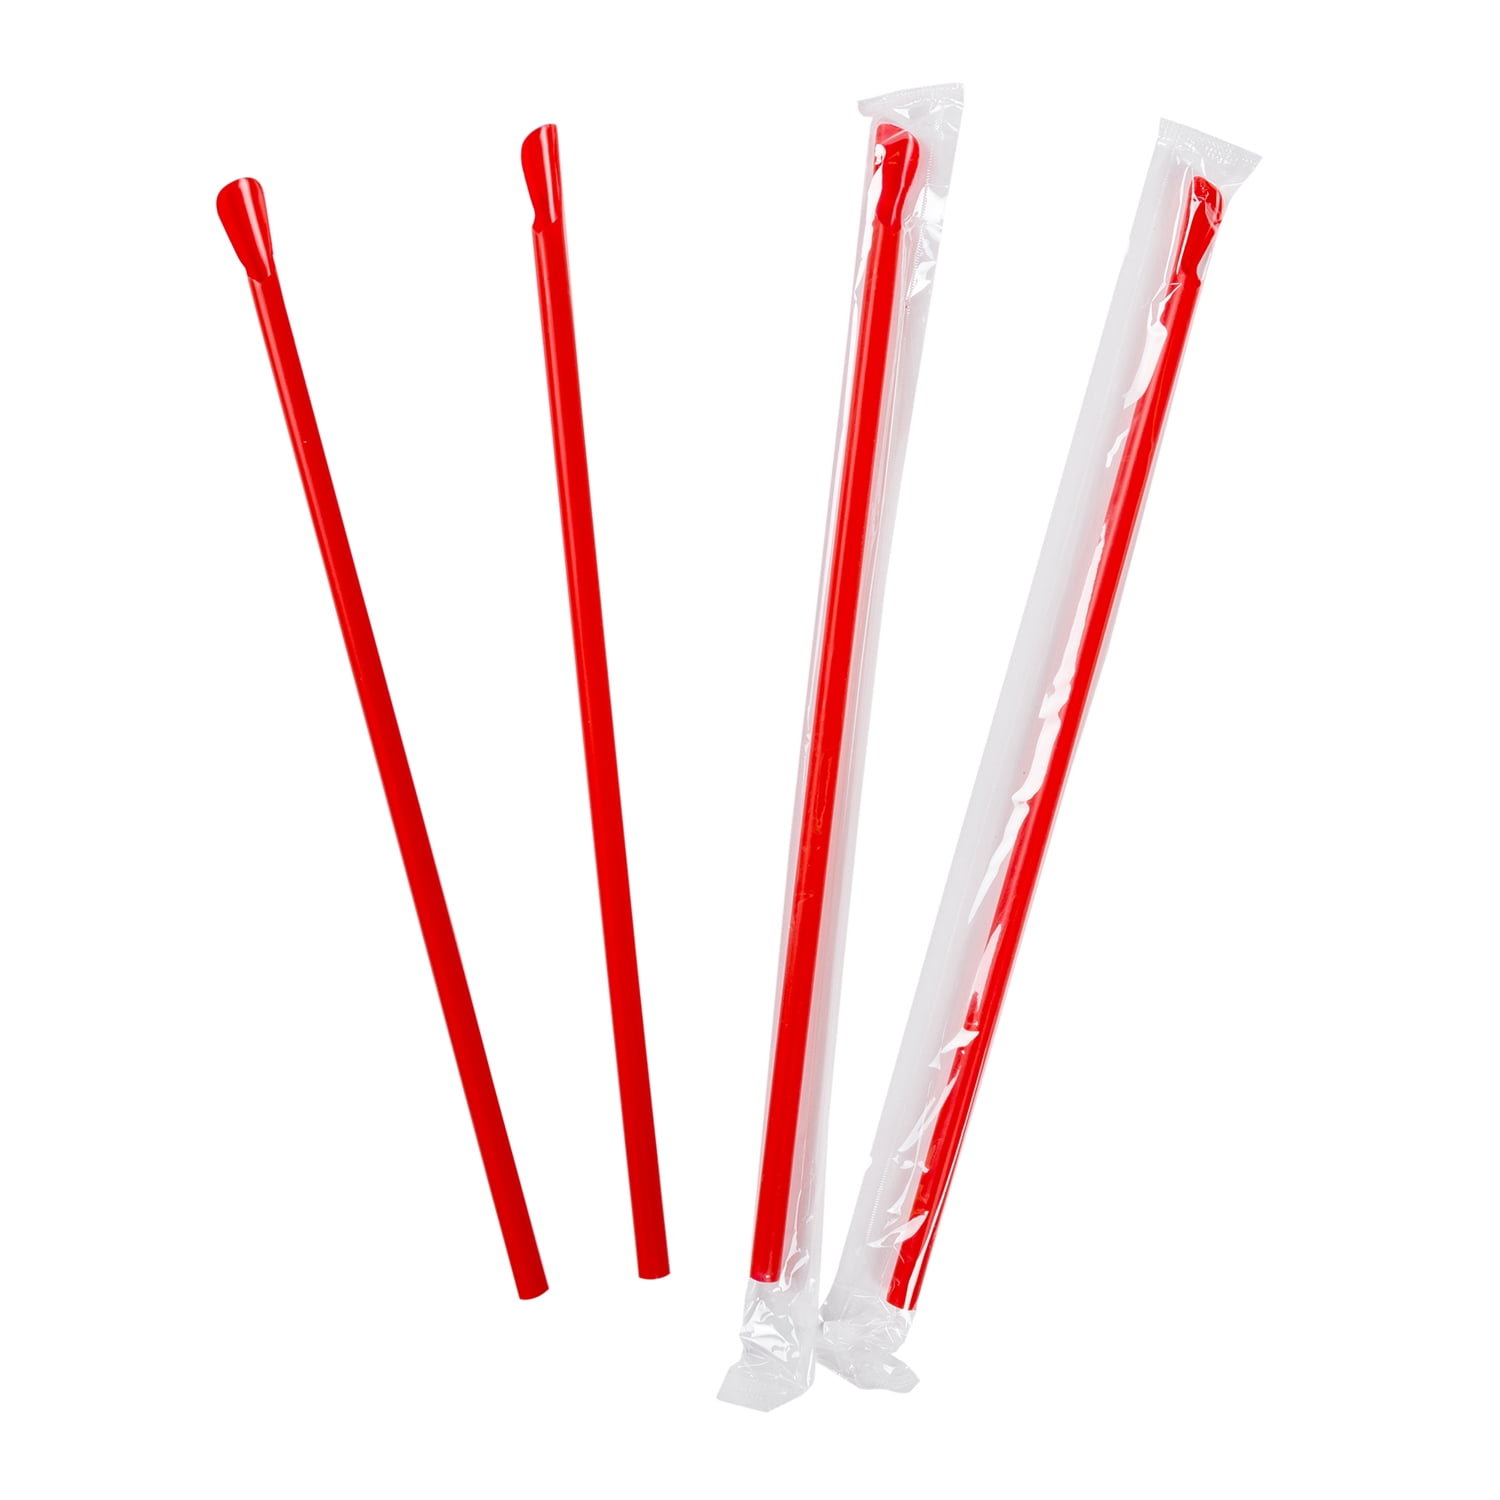 Spoon straw,Paper Spoon Straws Super Strong 10mm x 210mm,4 colored JUMBO spoon 